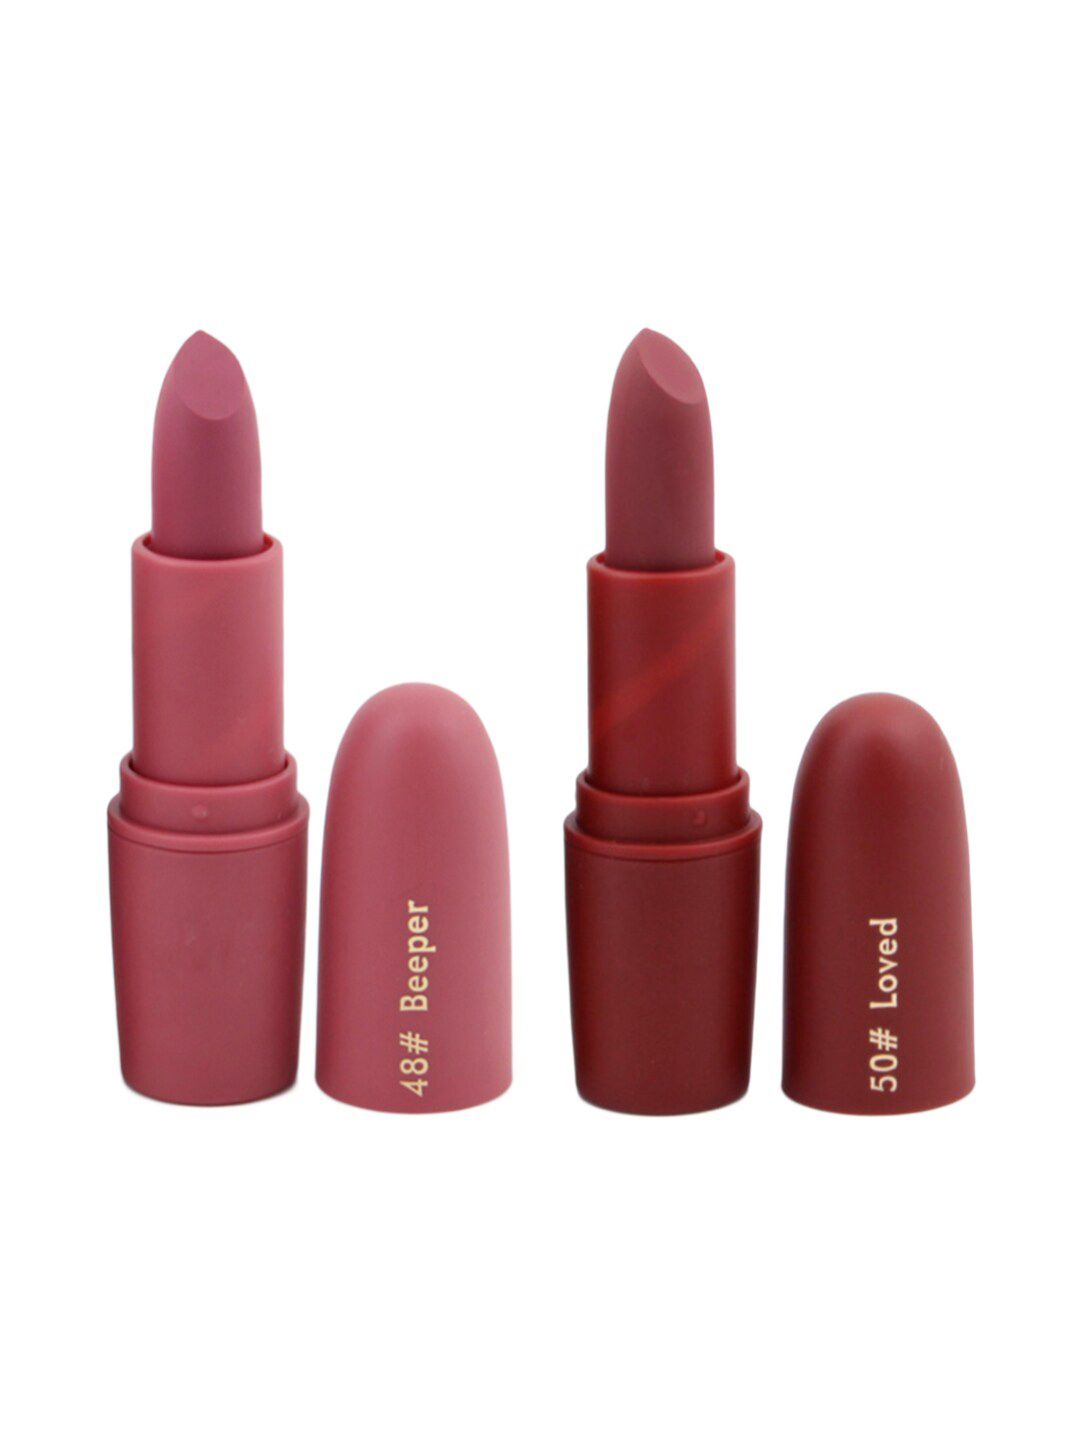 MISS ROSE Professional Make-Up Set of 2 Matte Creamy Lipsticks - Beeper 48 & Loved 50 Price in India